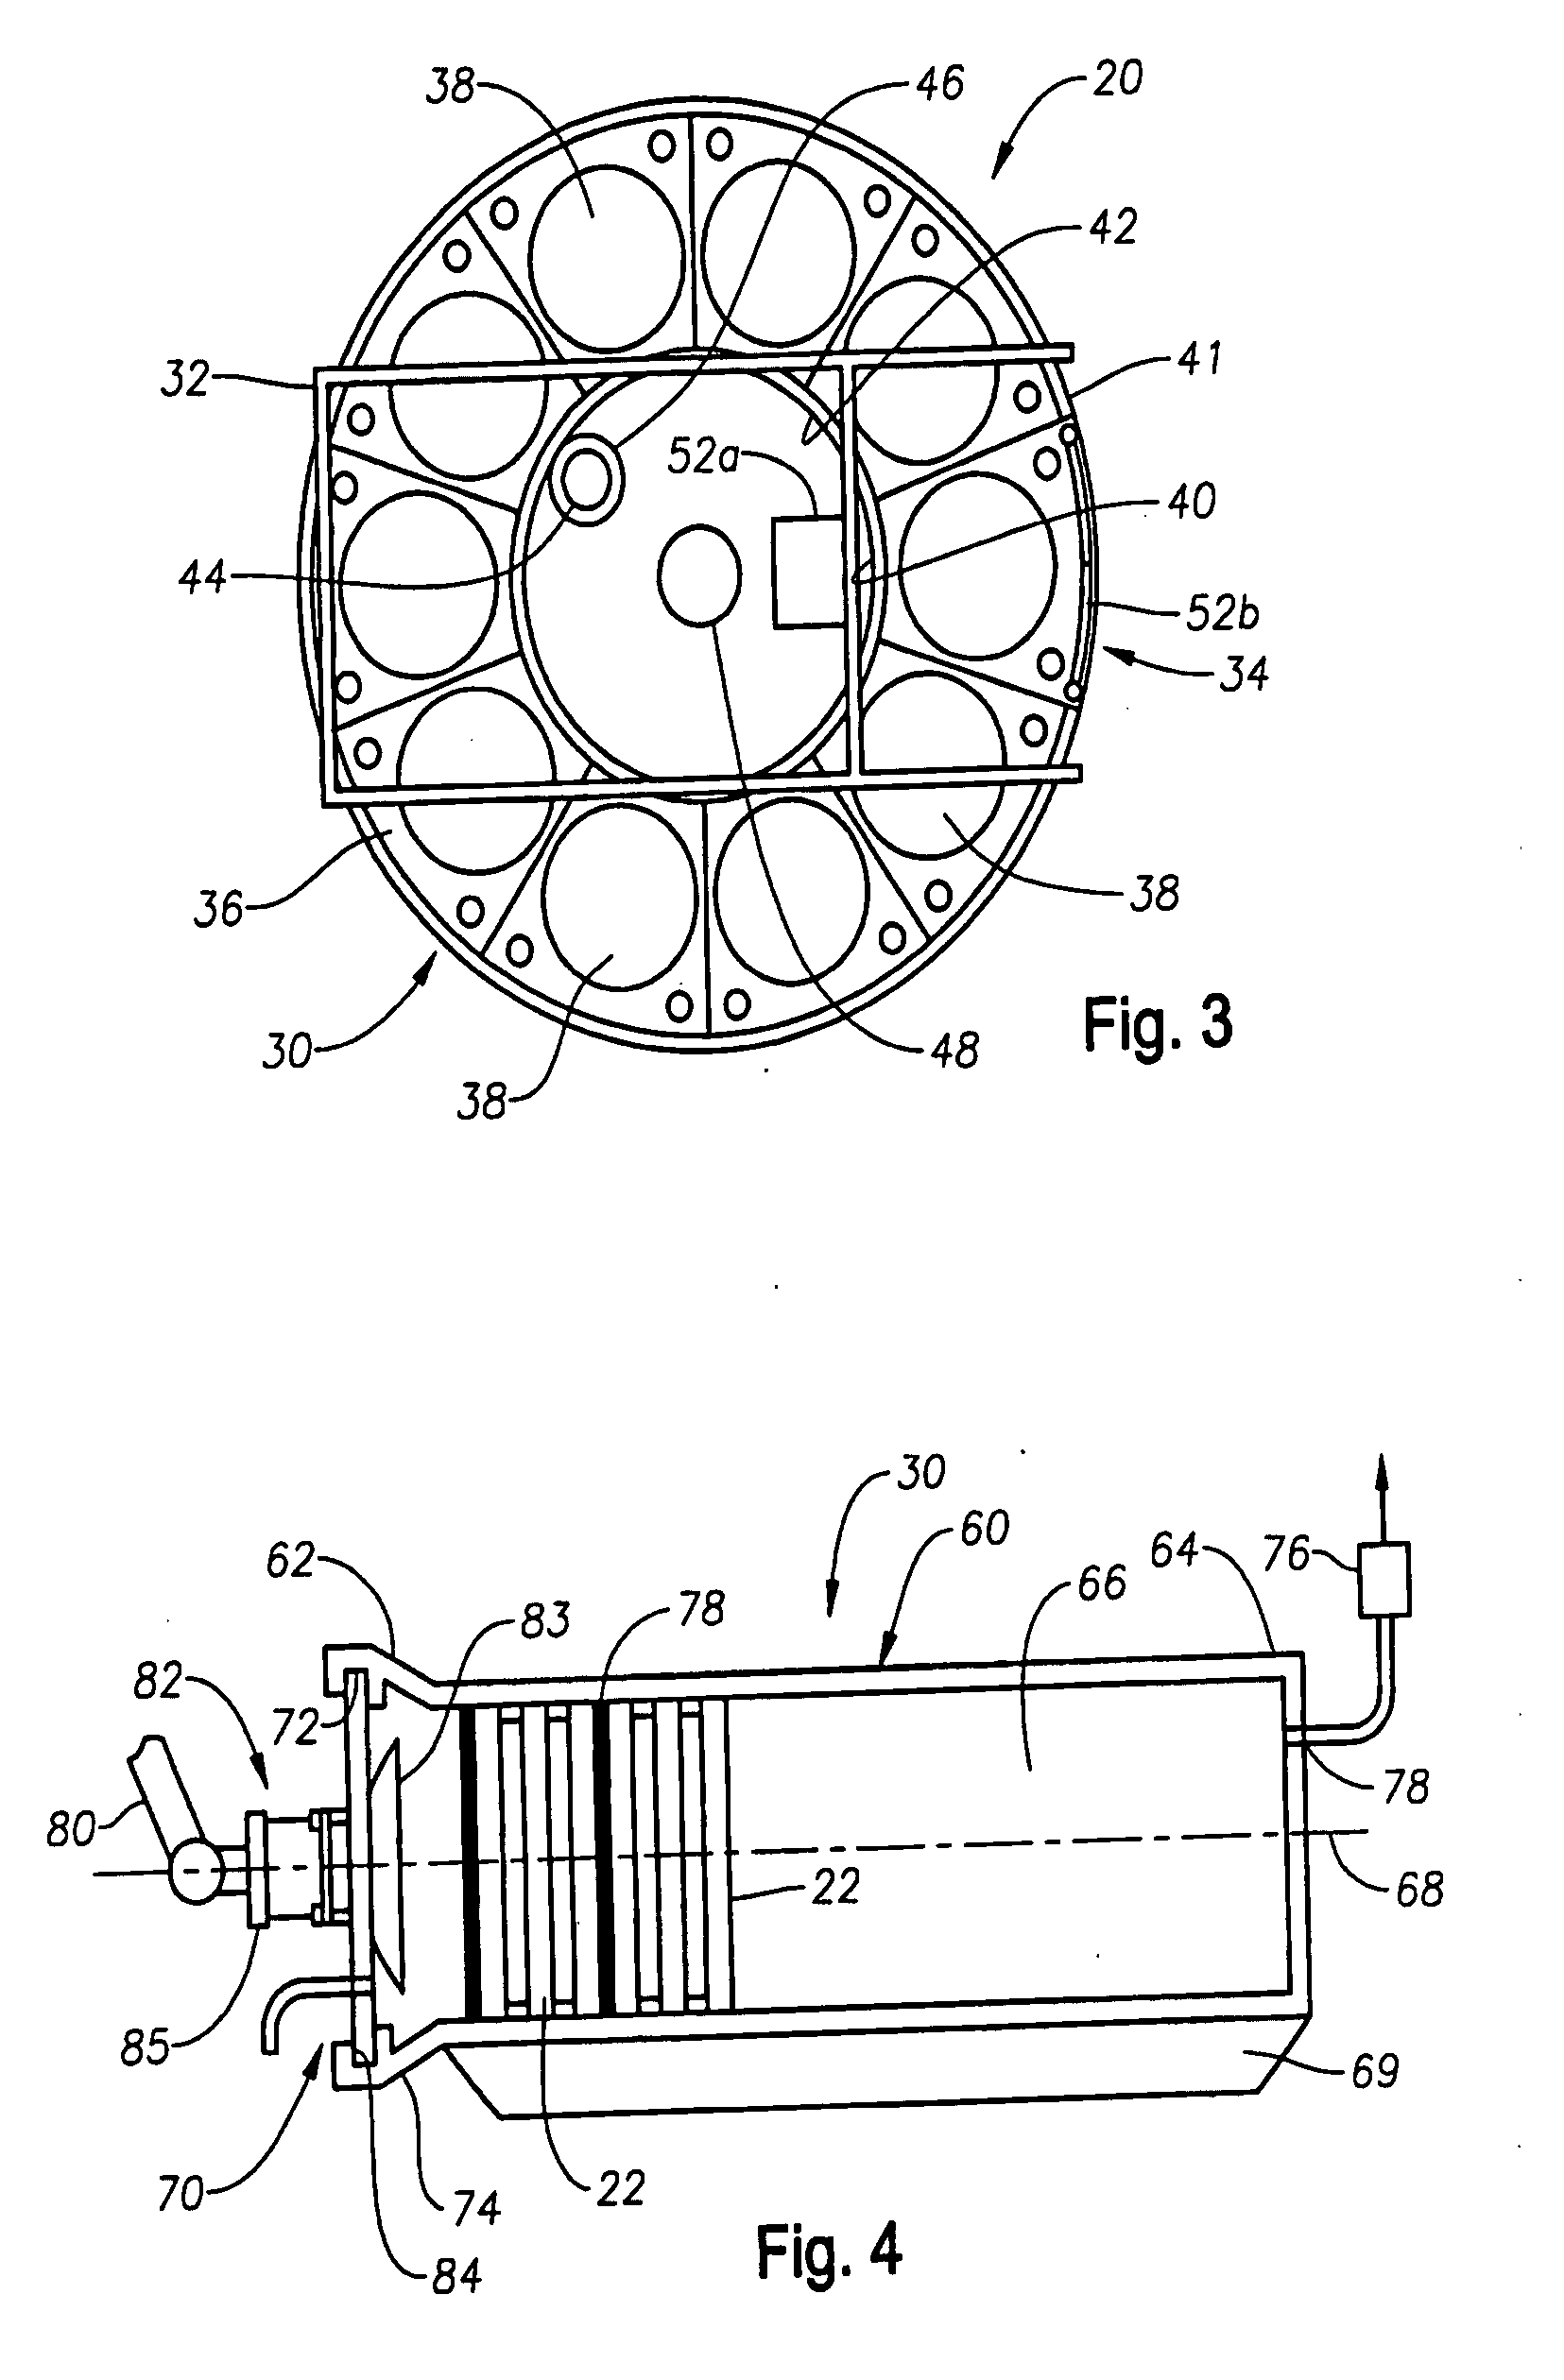 Method and apparatus for deployment of ocean bottom seismometers